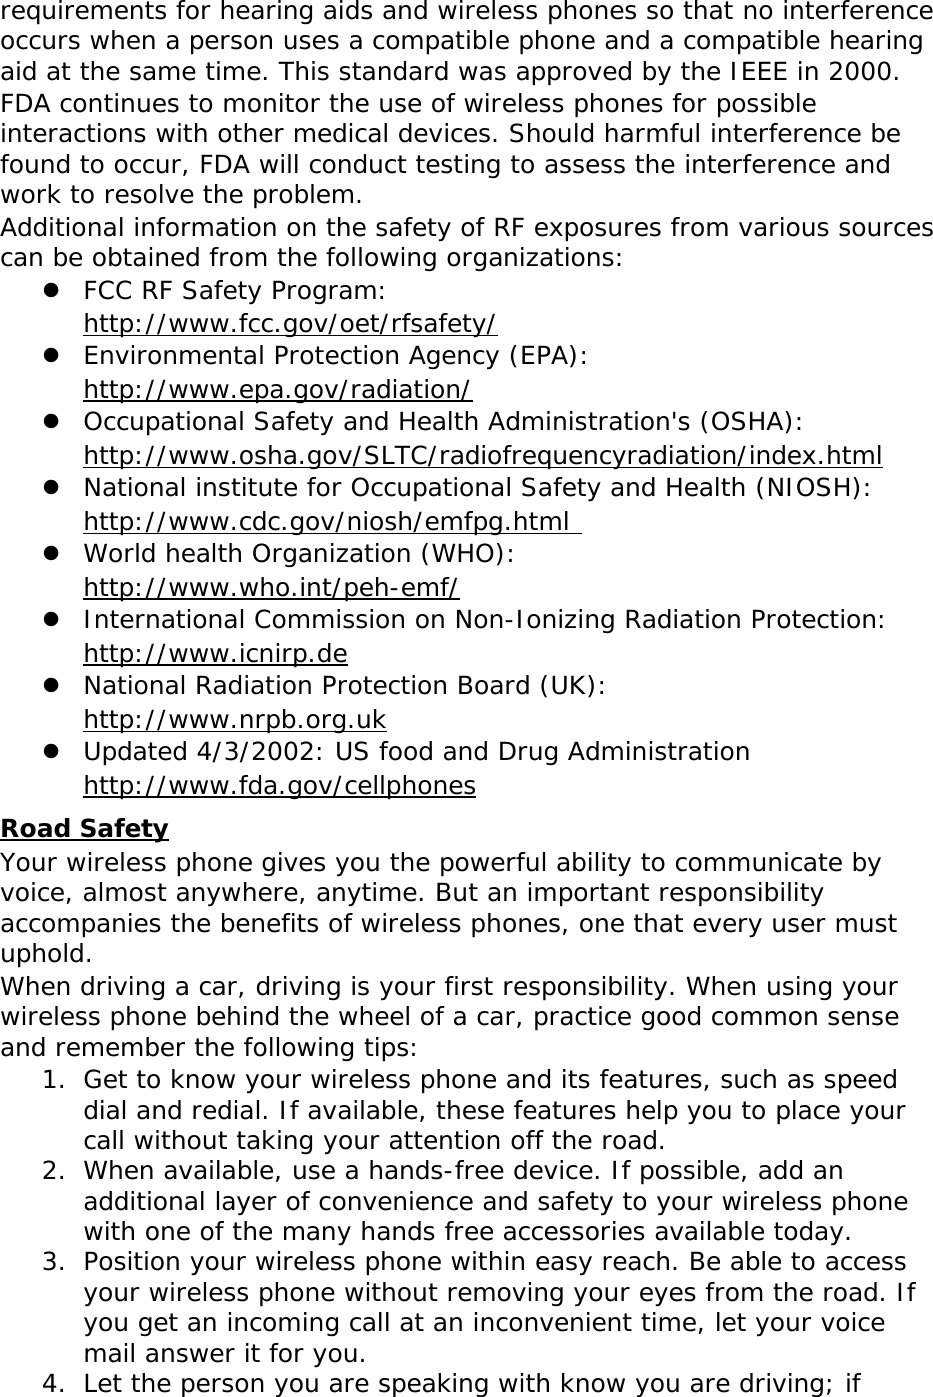 requirements for hearing aids and wireless phones so that no interference occurs when a person uses a compatible phone and a compatible hearing aid at the same time. This standard was approved by the IEEE in 2000. FDA continues to monitor the use of wireless phones for possible interactions with other medical devices. Should harmful interference be found to occur, FDA will conduct testing to assess the interference and work to resolve the problem. Additional information on the safety of RF exposures from various sources can be obtained from the following organizations:  FCC RF Safety Program:  http://www.fcc.gov/oet/rfsafety/  Environmental Protection Agency (EPA):  http://www.epa.gov/radiation/  Occupational Safety and Health Administration&apos;s (OSHA):       http://www.osha.gov/SLTC/radiofrequencyradiation/index.html  National institute for Occupational Safety and Health (NIOSH):  http://www.cdc.gov/niosh/emfpg.html   World health Organization (WHO):  http://www.who.int/peh-emf/  International Commission on Non-Ionizing Radiation Protection:  http://www.icnirp.de  National Radiation Protection Board (UK):  http://www.nrpb.org.uk  Updated 4/3/2002: US food and Drug Administration  http://www.fda.gov/cellphones Road Safety Your wireless phone gives you the powerful ability to communicate by voice, almost anywhere, anytime. But an important responsibility accompanies the benefits of wireless phones, one that every user must uphold. When driving a car, driving is your first responsibility. When using your wireless phone behind the wheel of a car, practice good common sense and remember the following tips: 1. Get to know your wireless phone and its features, such as speed dial and redial. If available, these features help you to place your call without taking your attention off the road. 2. When available, use a hands-free device. If possible, add an additional layer of convenience and safety to your wireless phone with one of the many hands free accessories available today. 3. Position your wireless phone within easy reach. Be able to access your wireless phone without removing your eyes from the road. If you get an incoming call at an inconvenient time, let your voice mail answer it for you. 4. Let the person you are speaking with know you are driving; if 